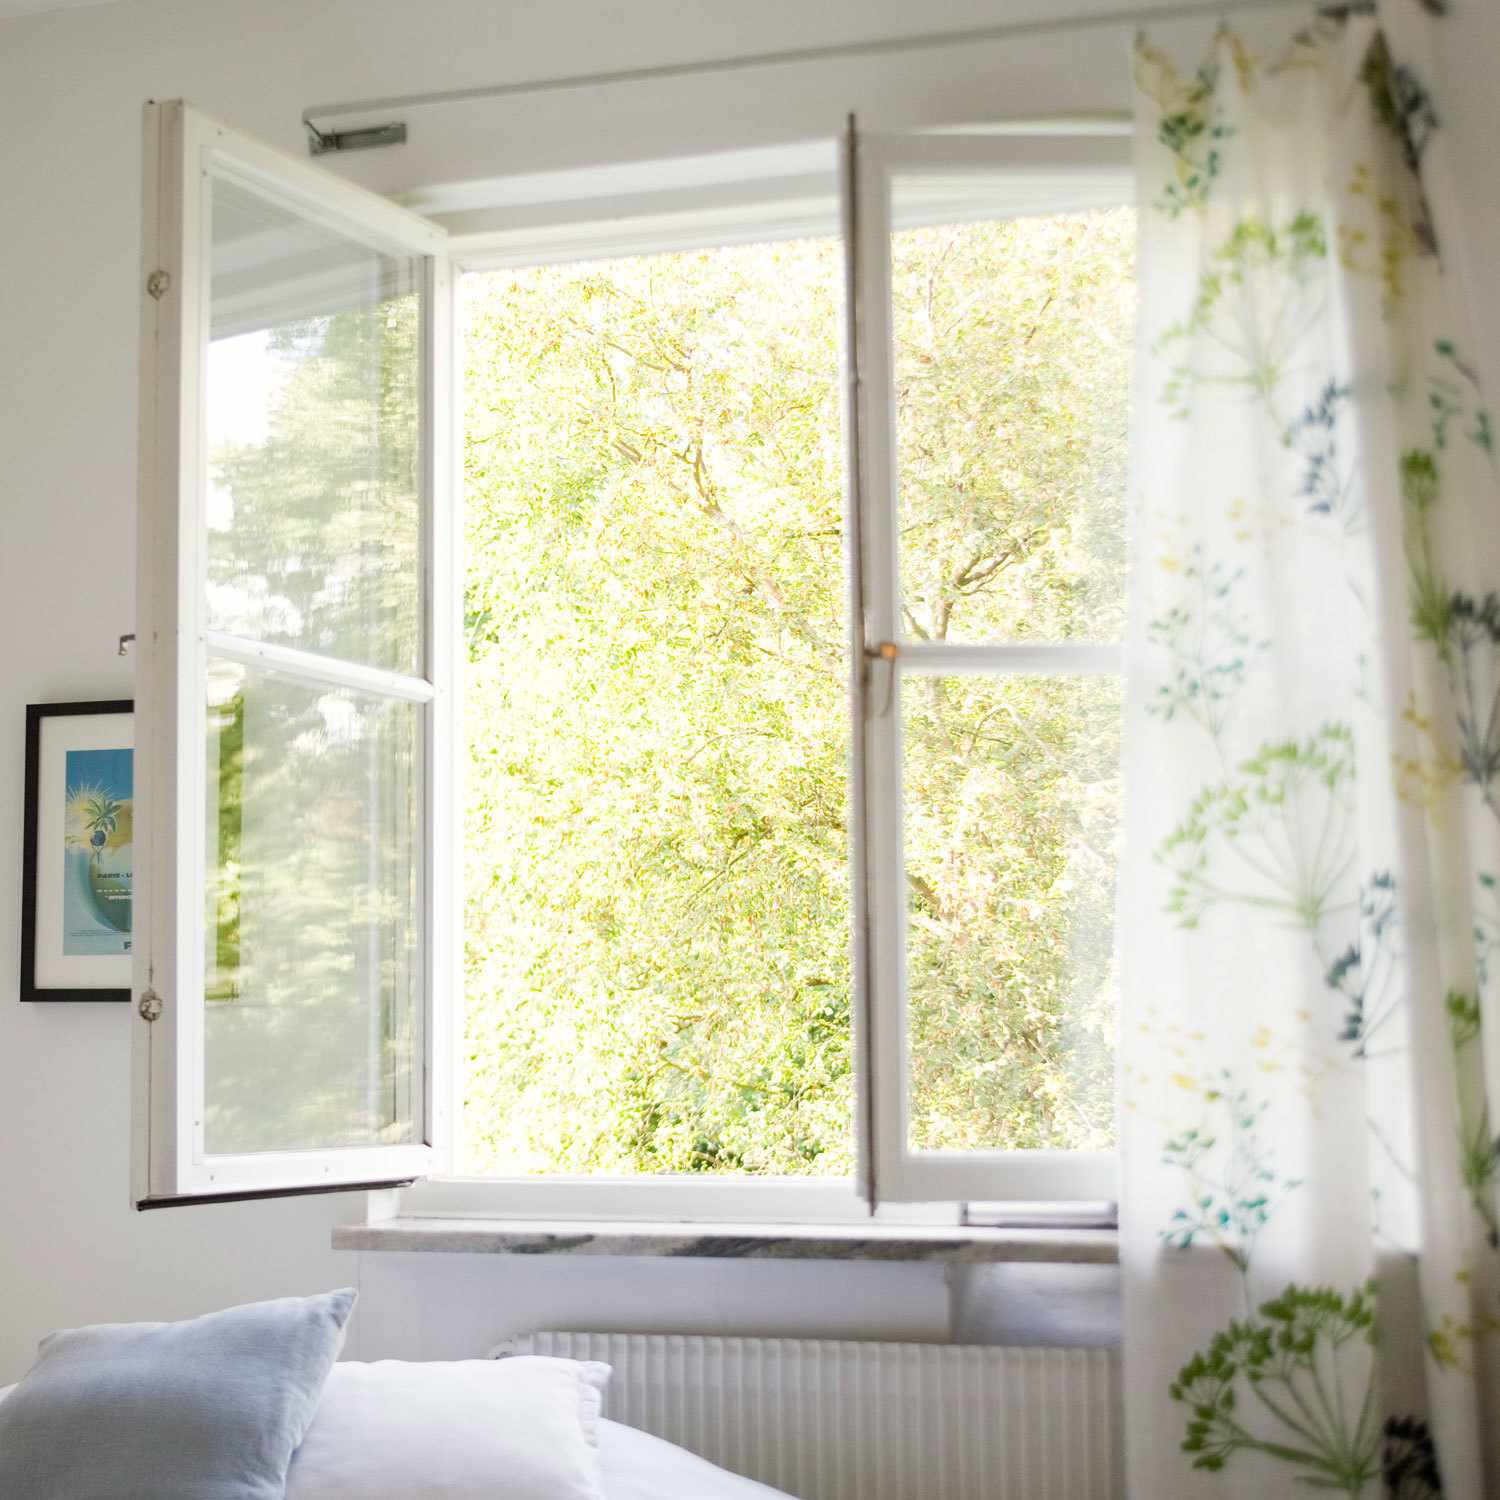 Could Opening Your Windows Help Prevent the Spread of Coronavirus? |  EatingWell